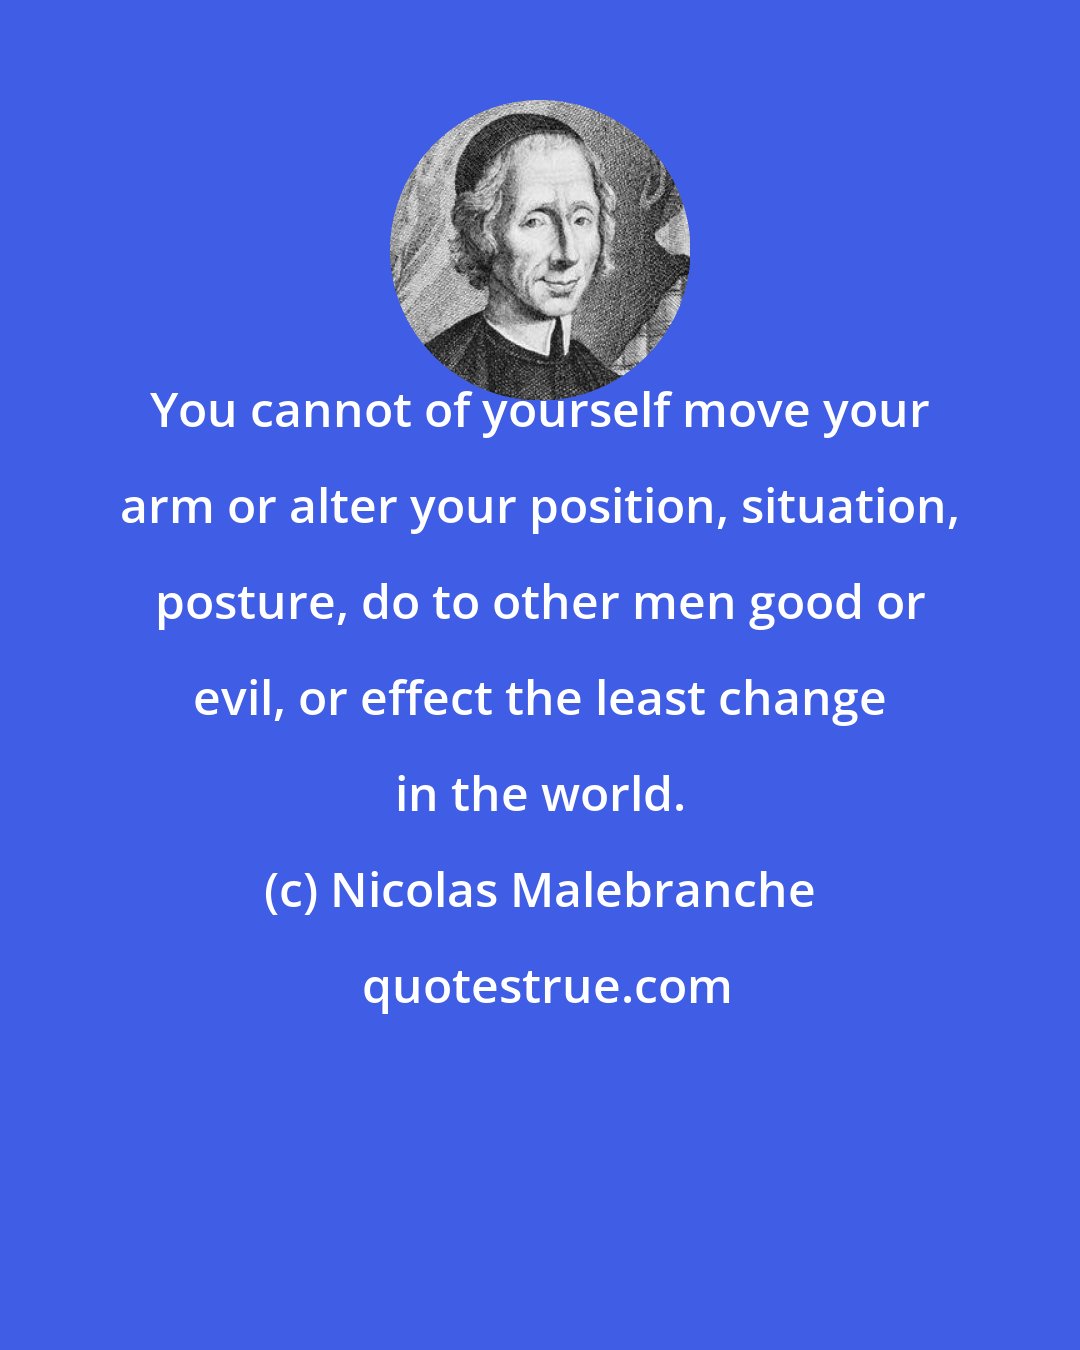 Nicolas Malebranche: You cannot of yourself move your arm or alter your position, situation, posture, do to other men good or evil, or effect the least change in the world.